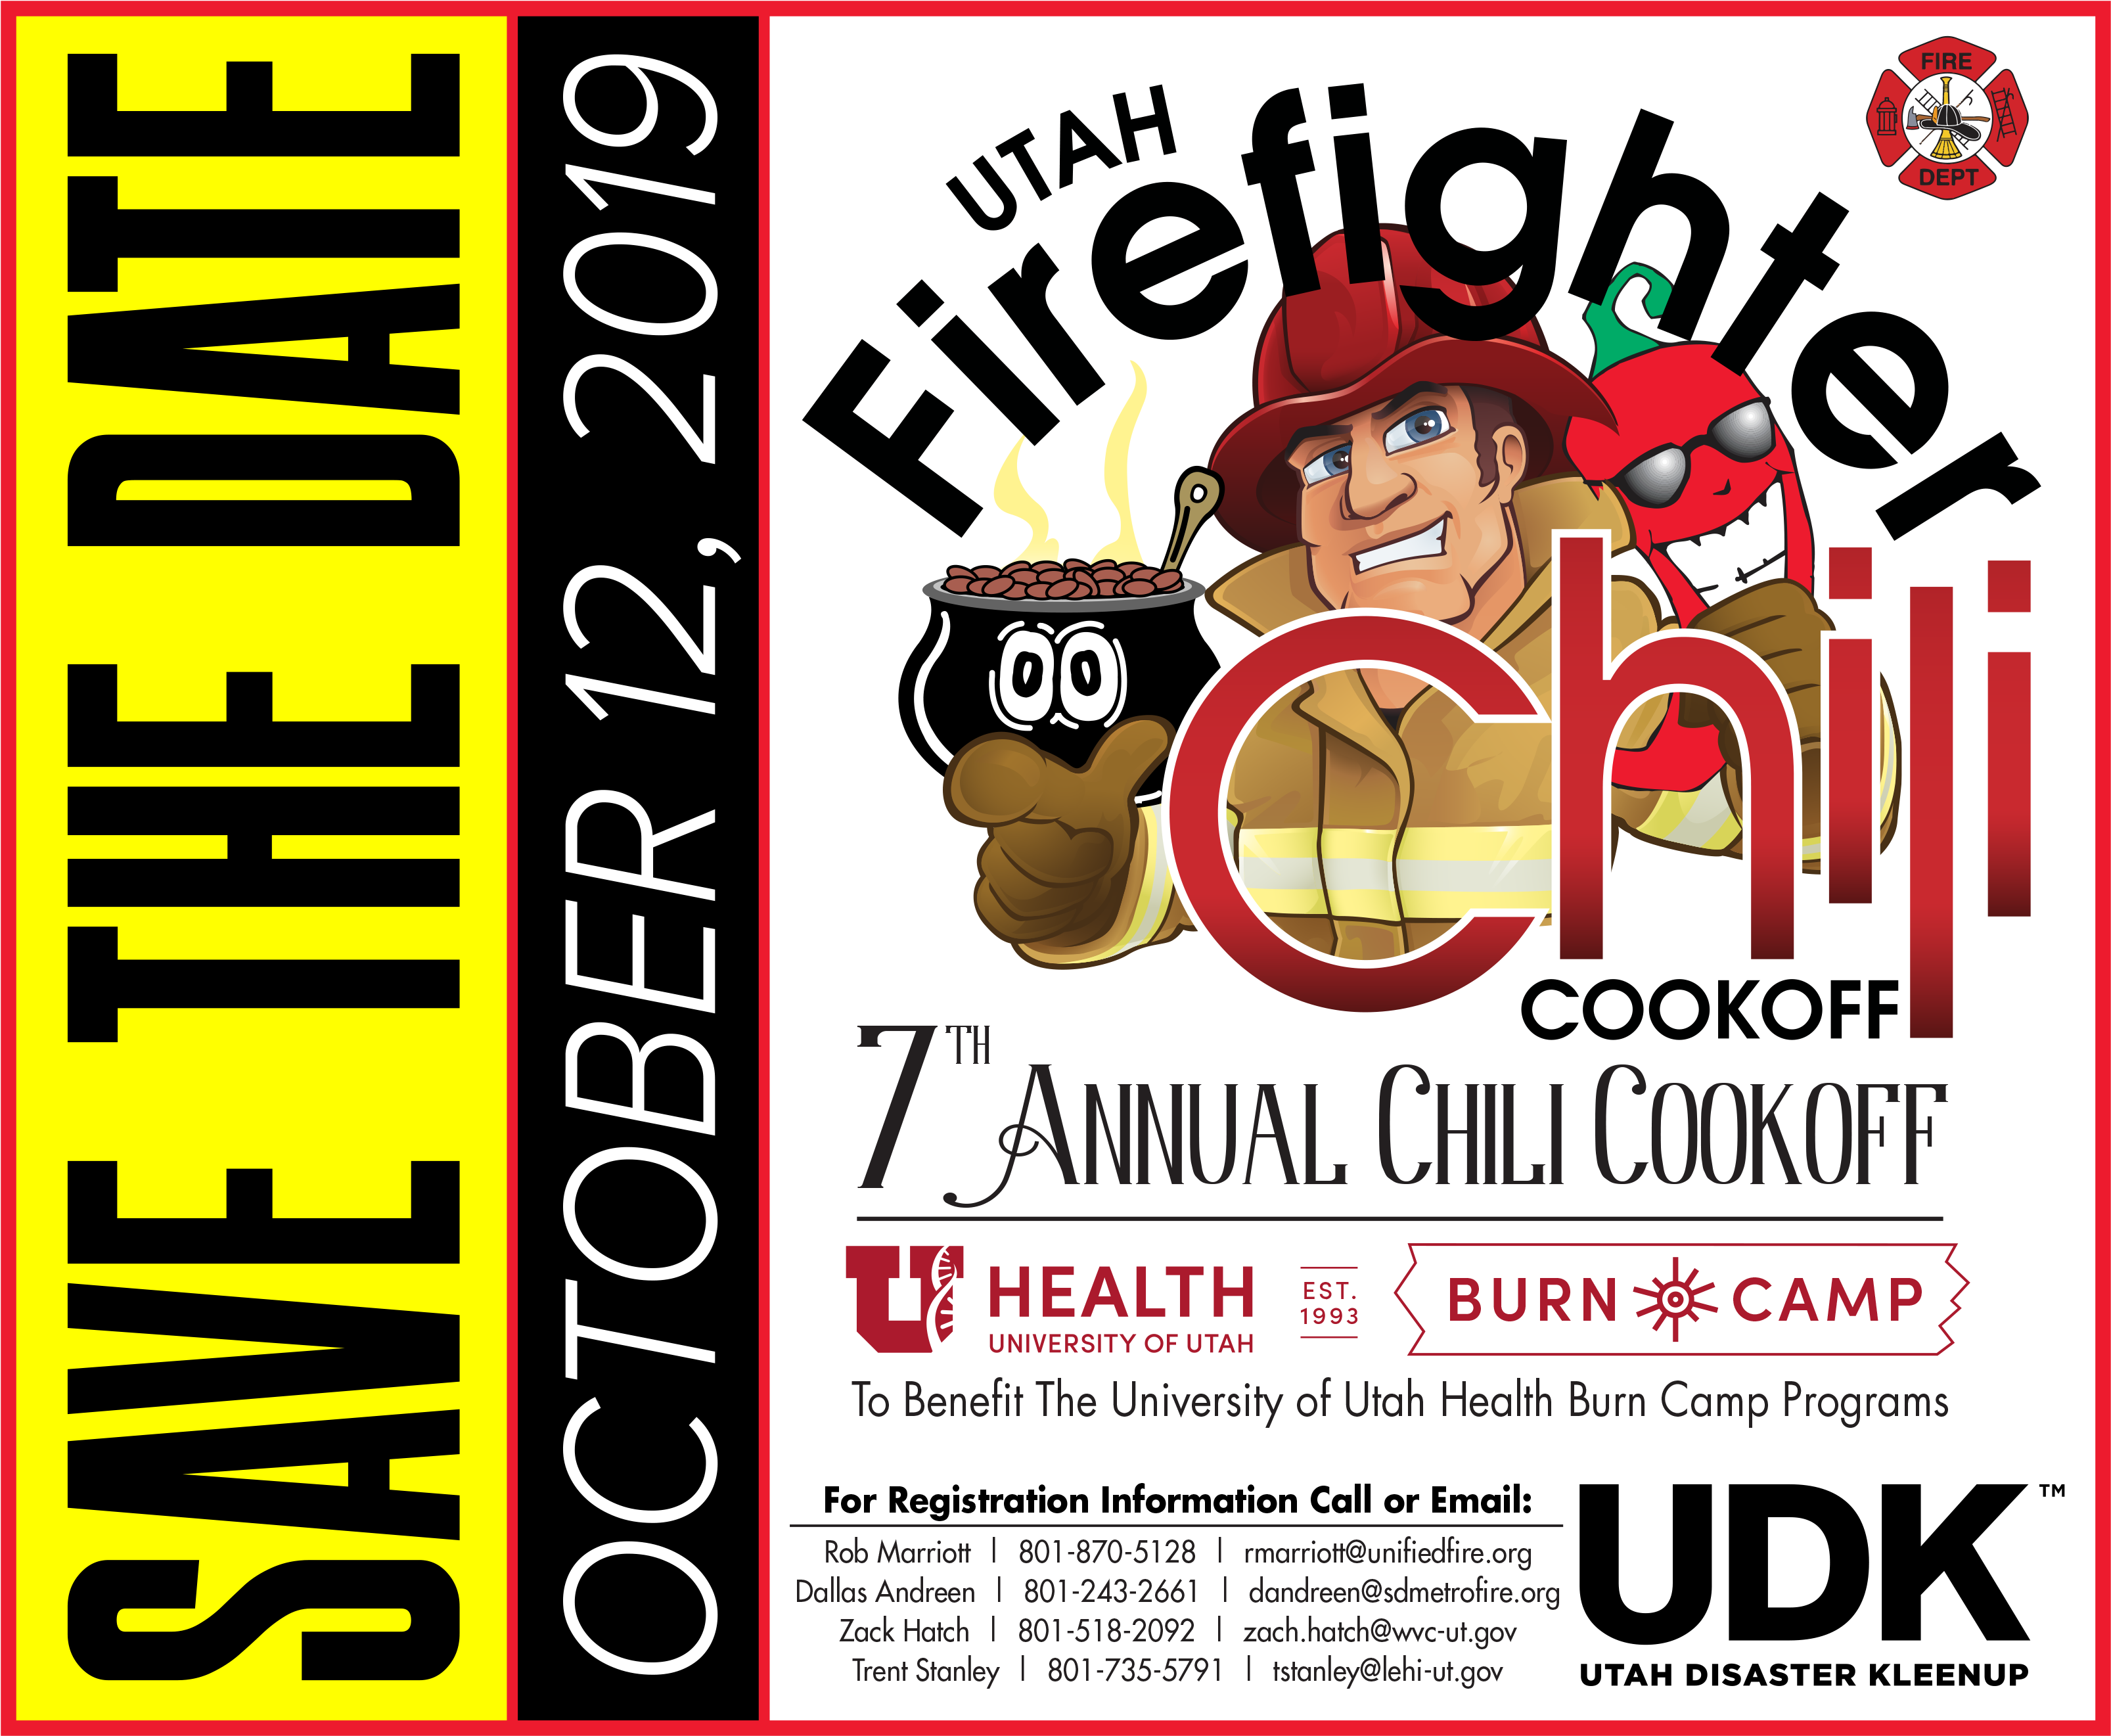 Hero Chili Cookoff Graphic - Utah Firefighter Chili Cook Off, Hd Png Download